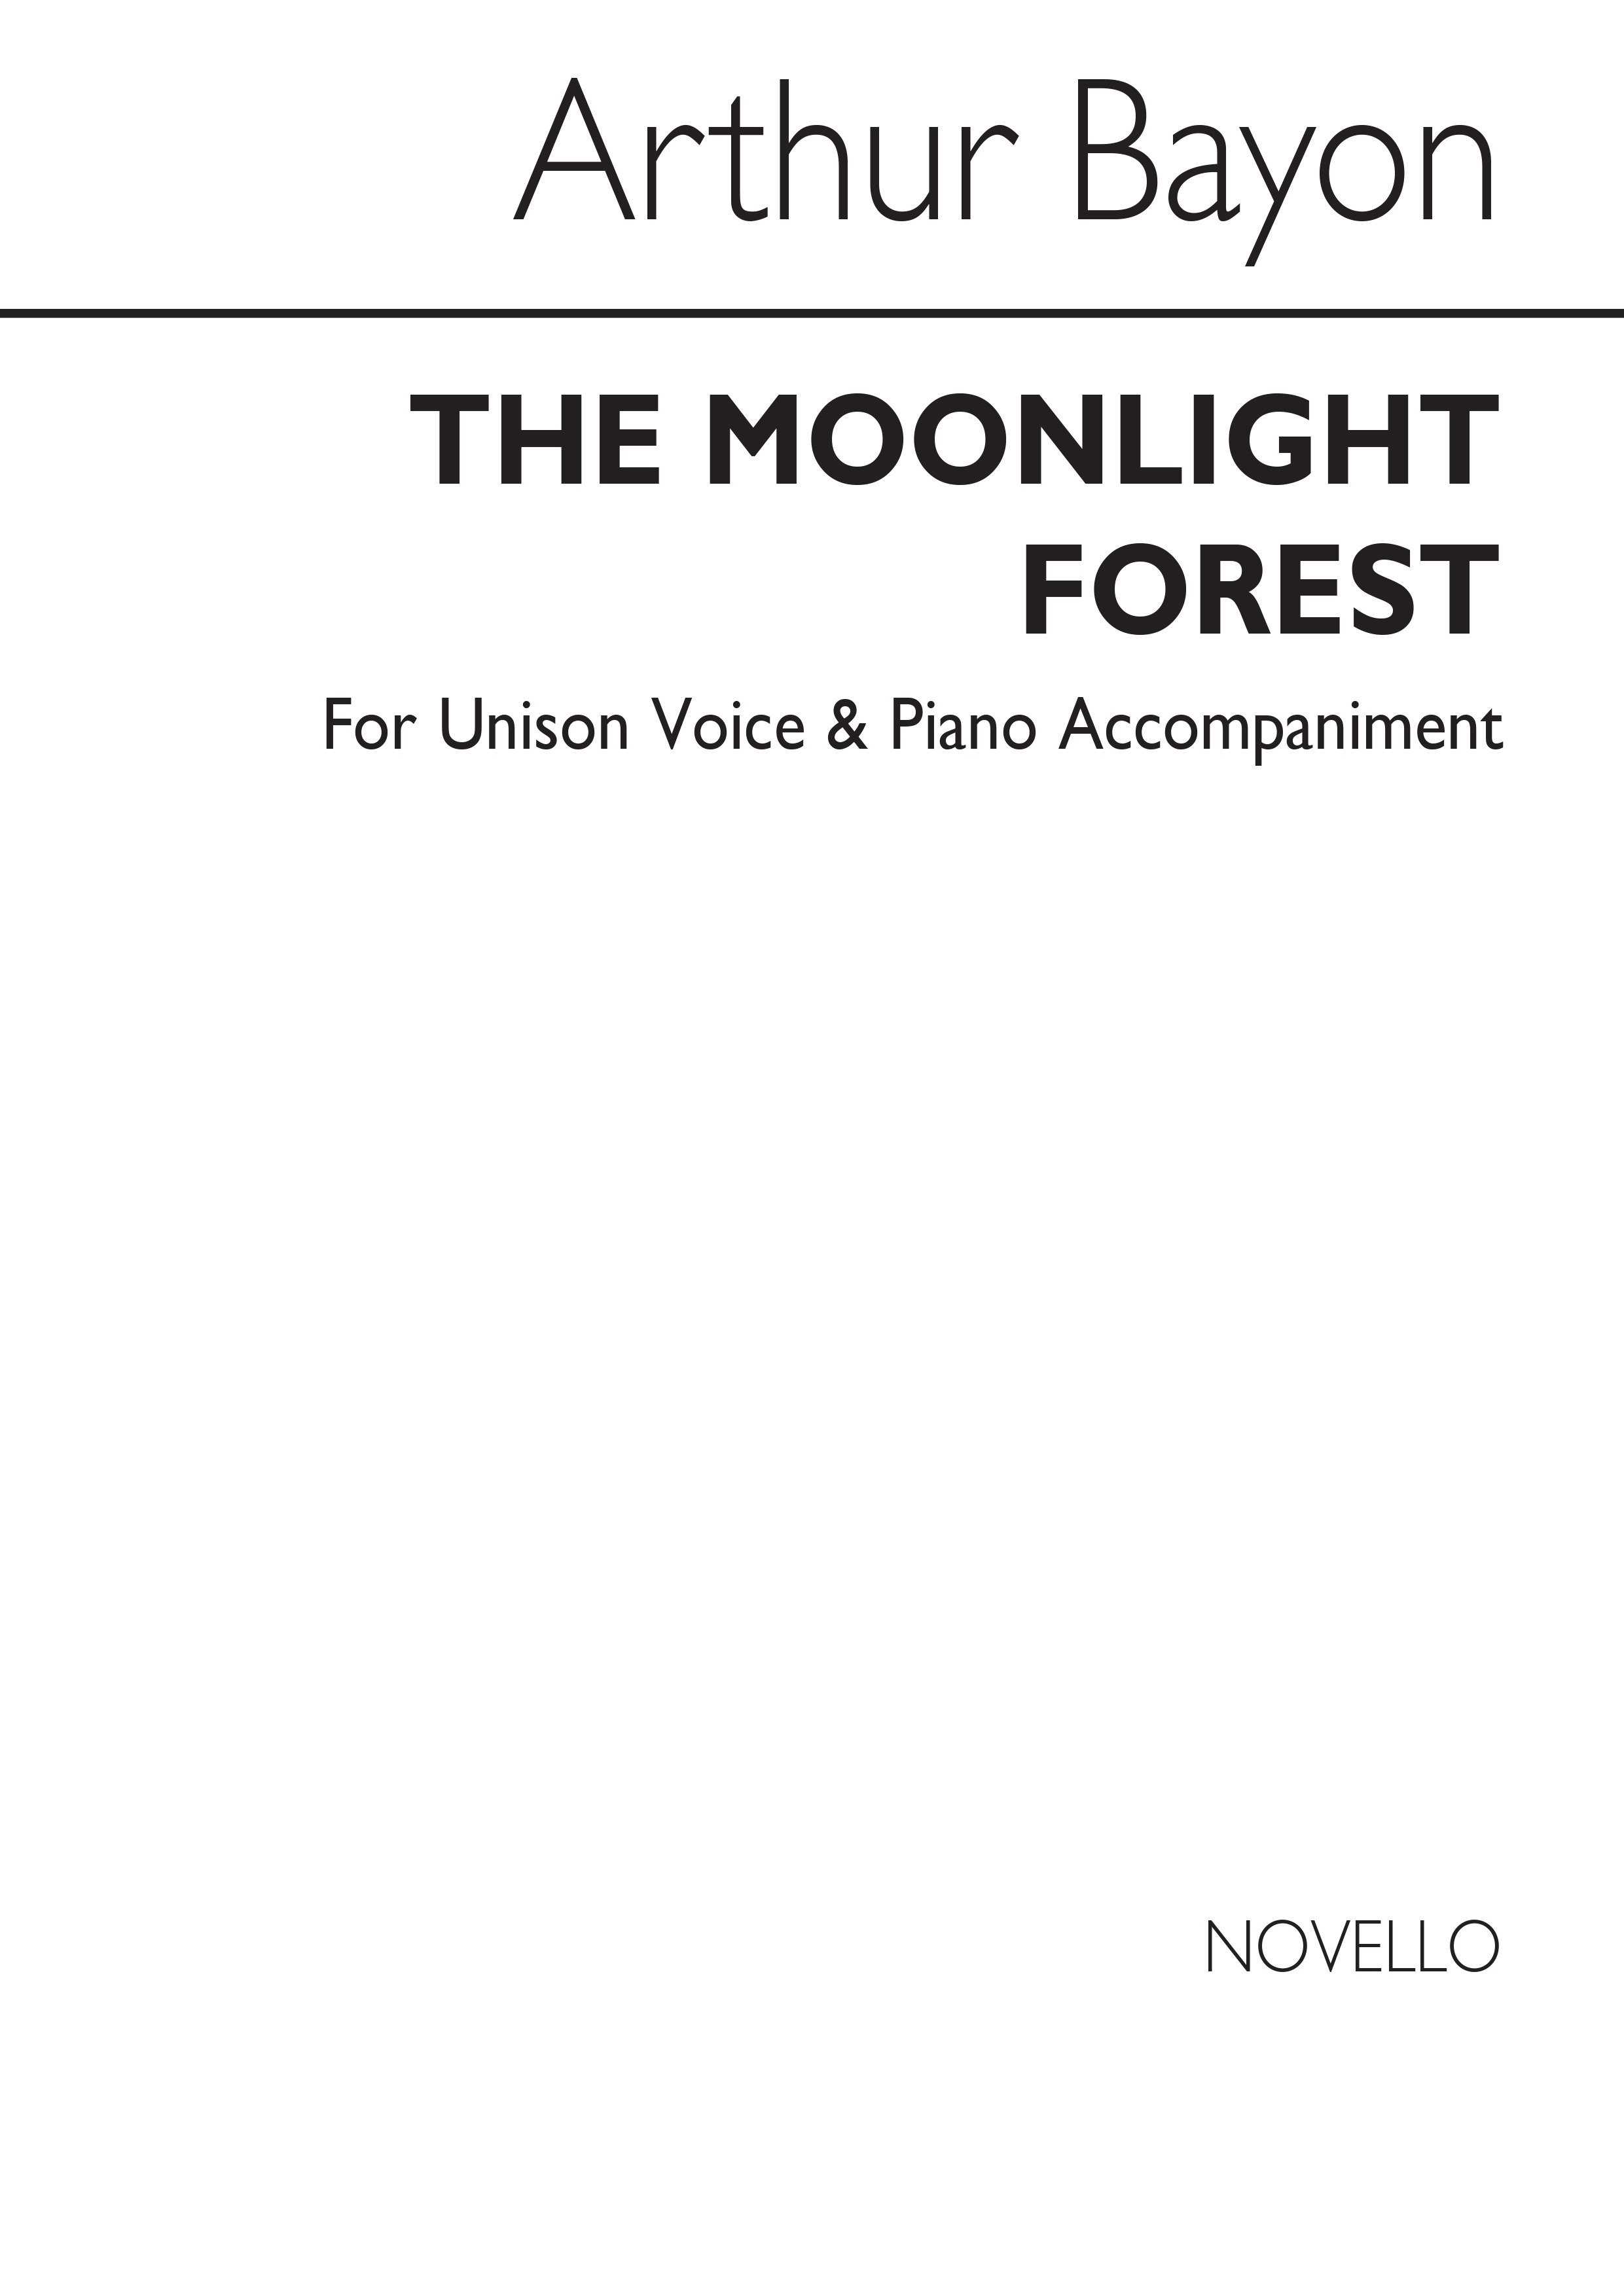 Baynon, A The Moonlit Forest Unis